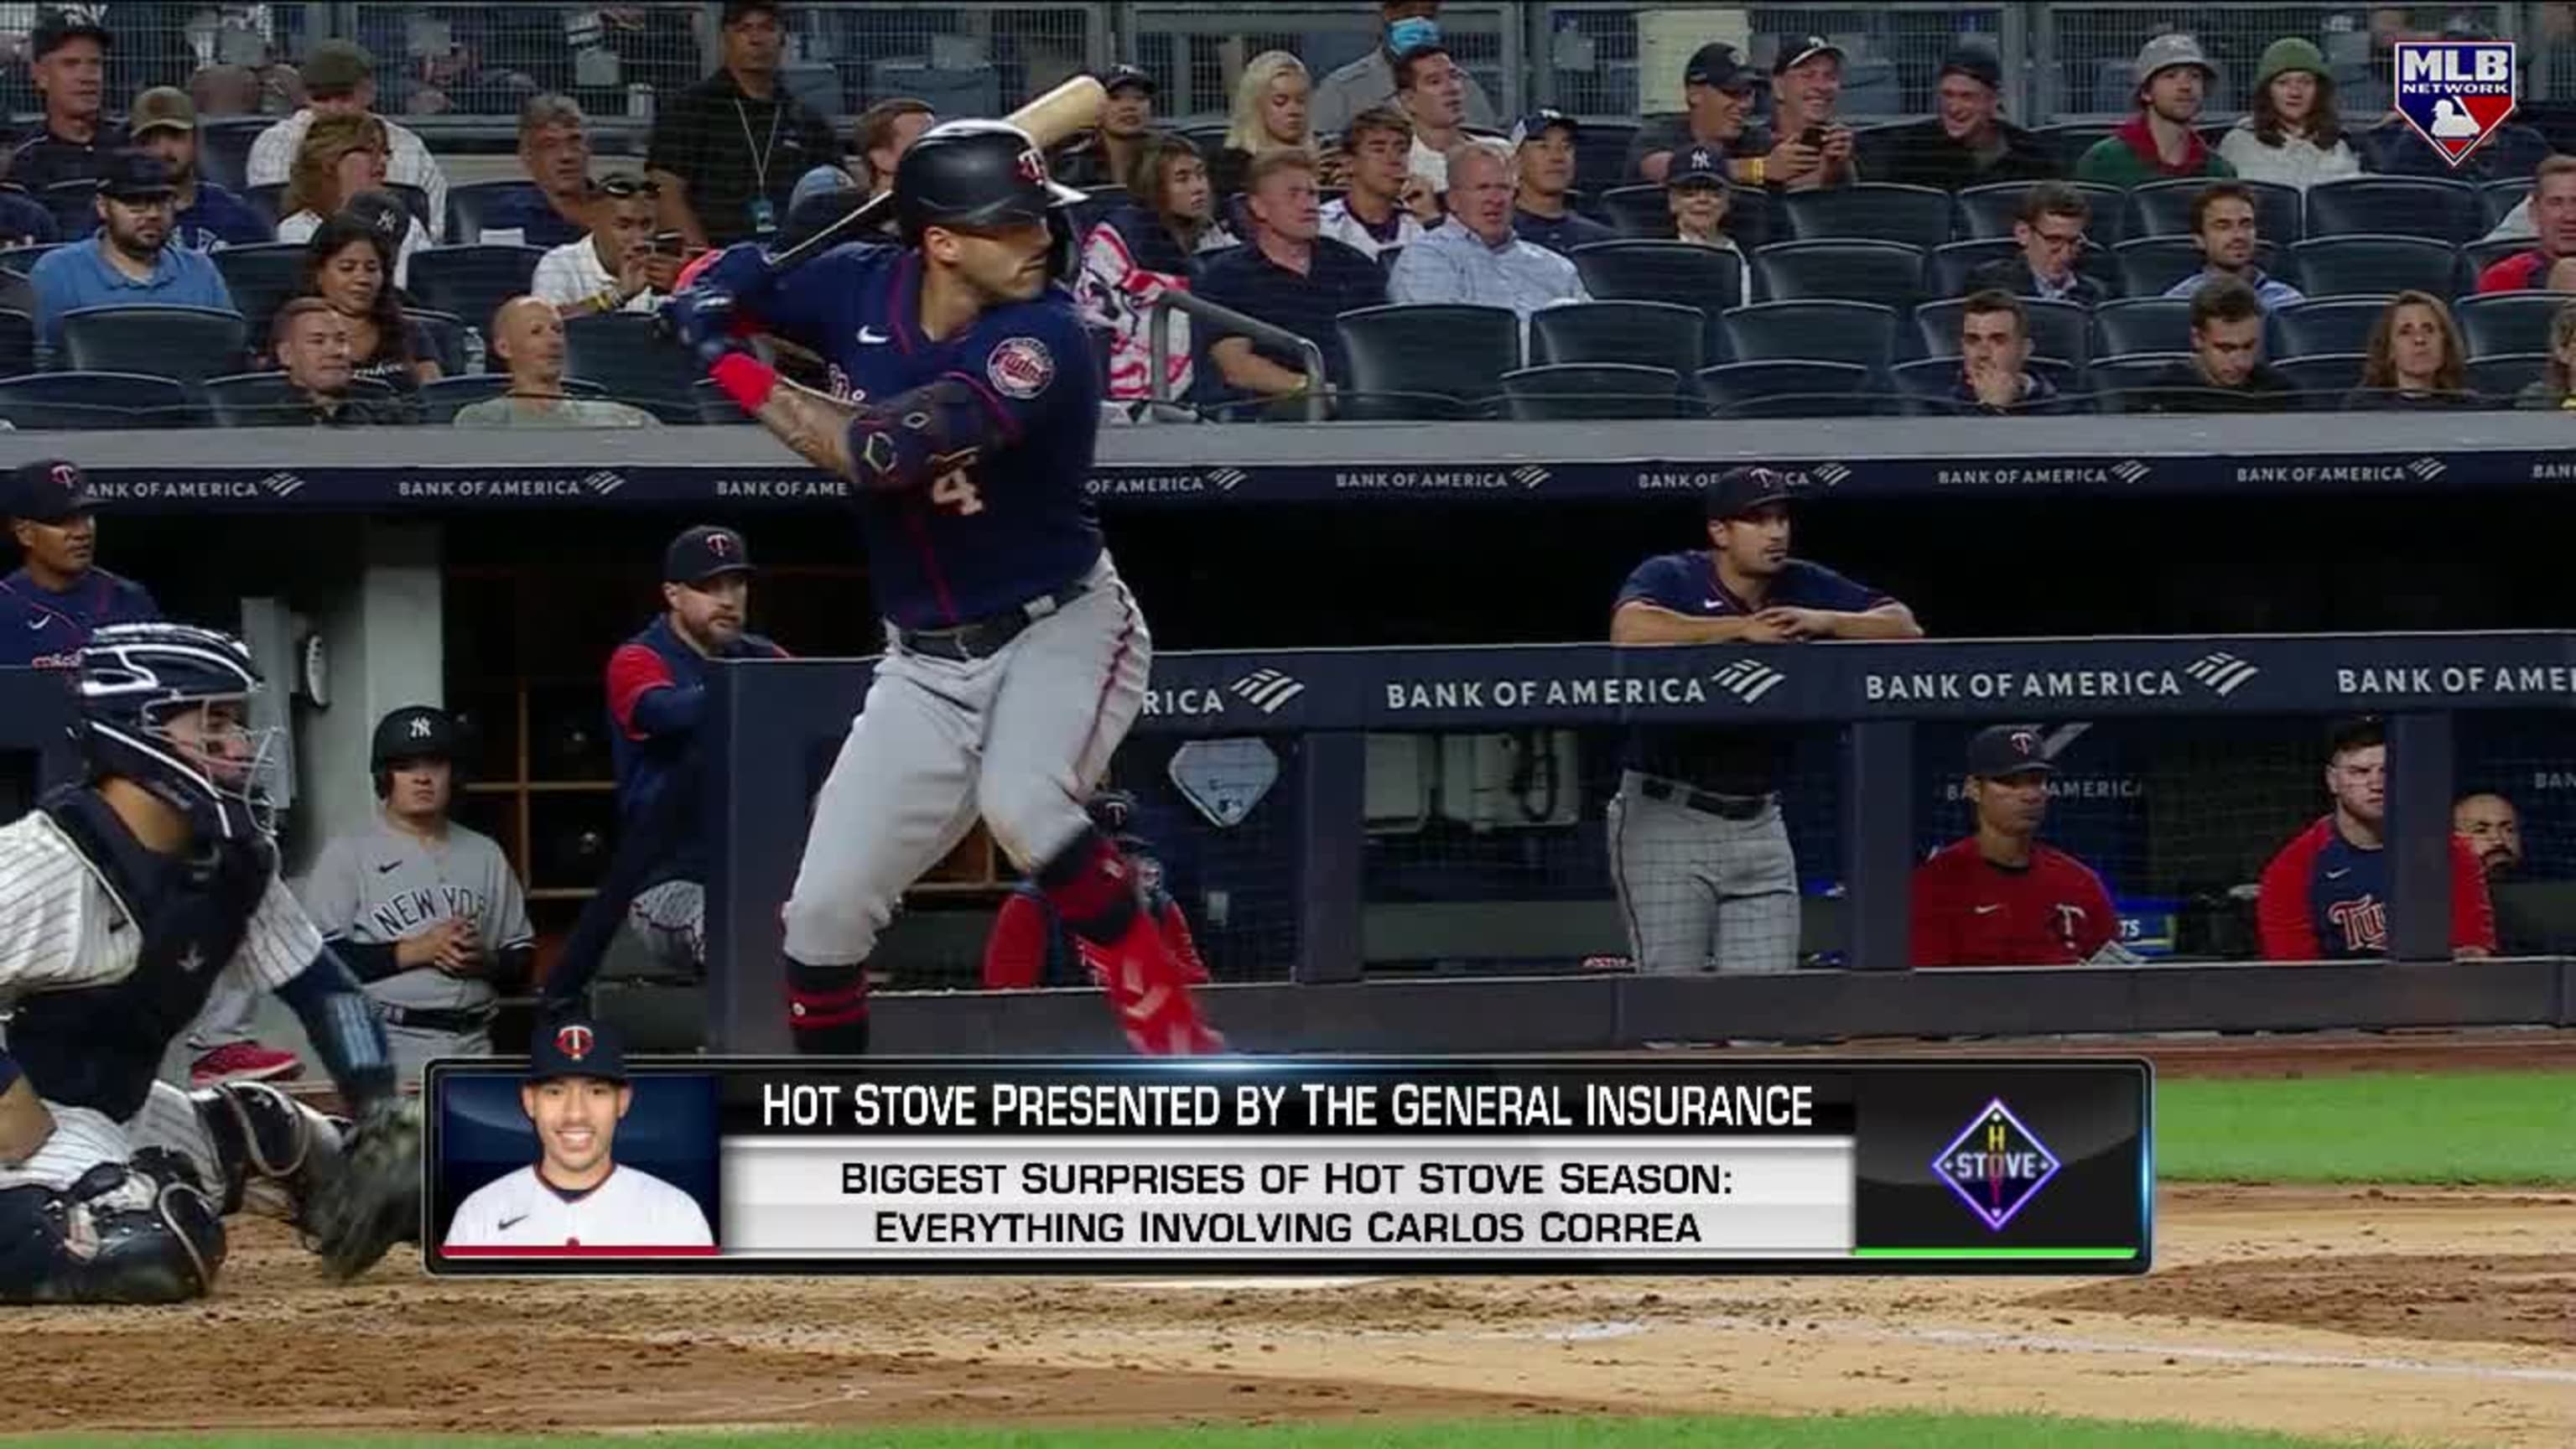 MLB Hot Stove: Unsigned Carlos Correa, Wife Post TikTok Video with